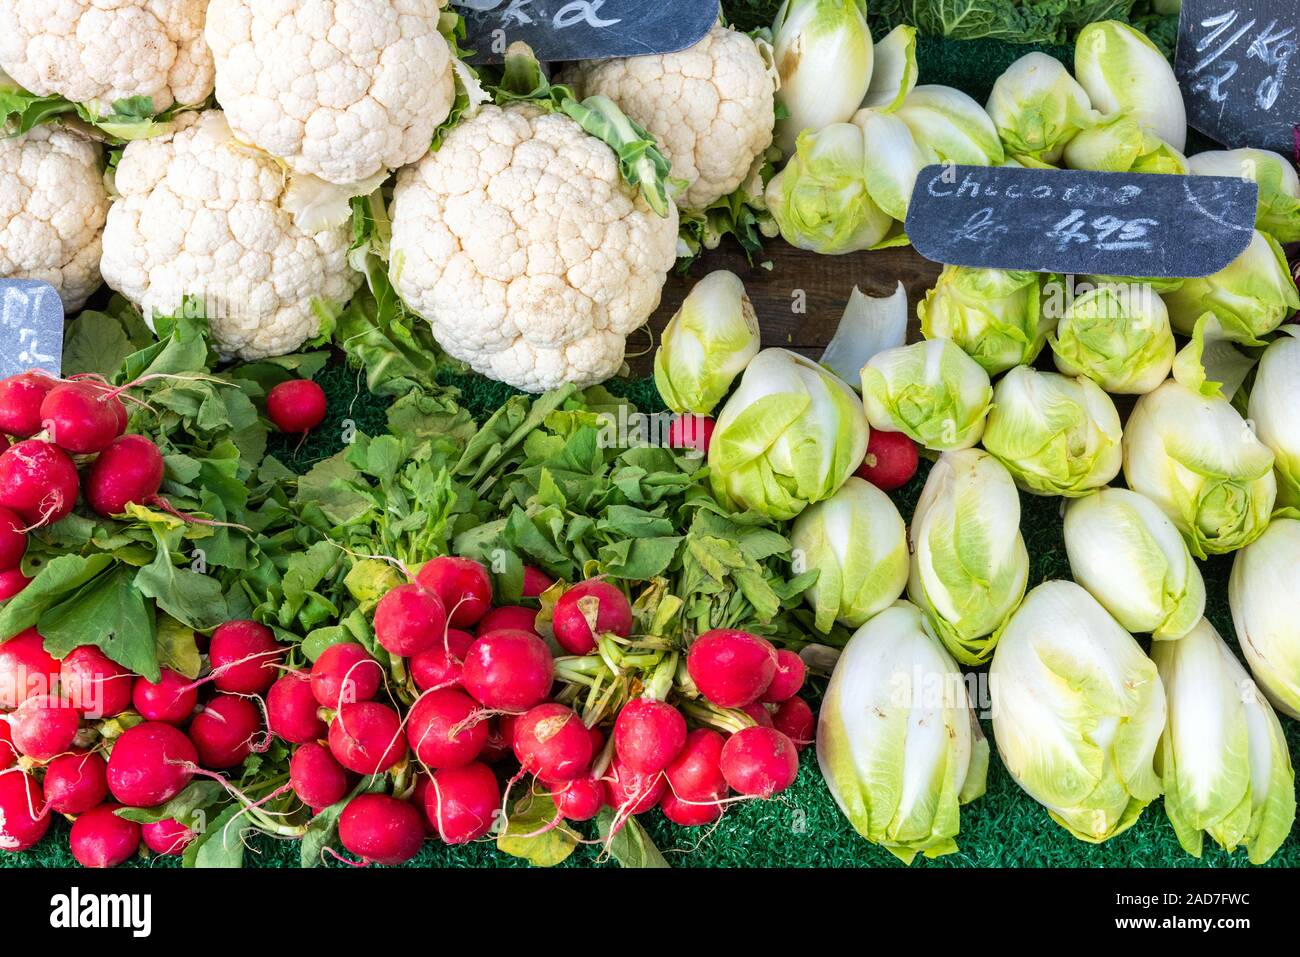 Radish, cauliflower and chicory for sale at a market Stock Photo